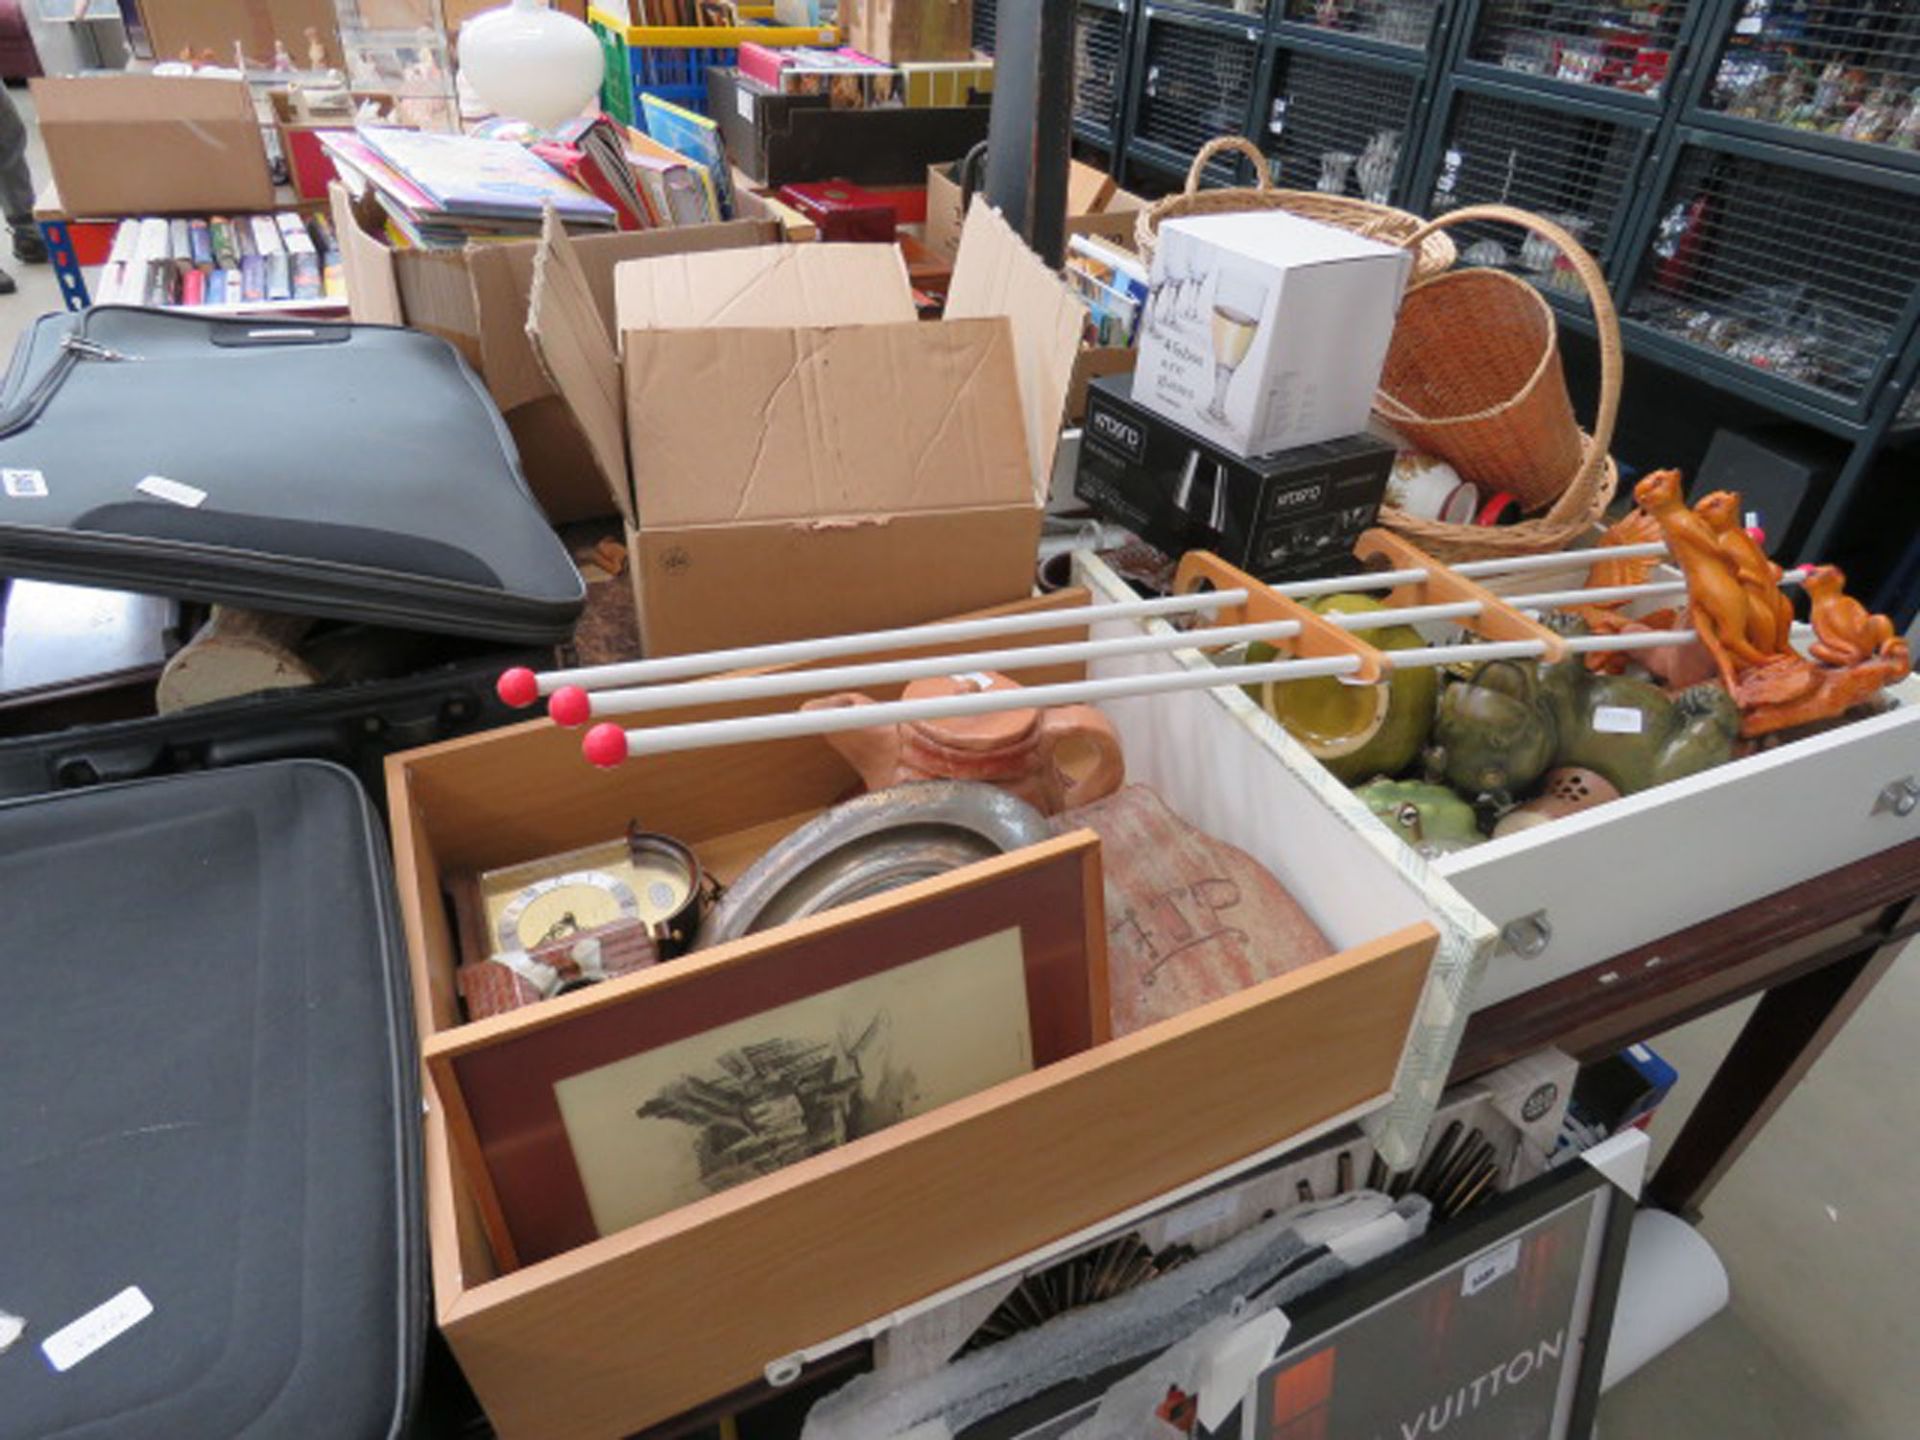 4 boxes and 2 suitcases containing silver plate, pottery, die cast toys, binoculars, prints, rack